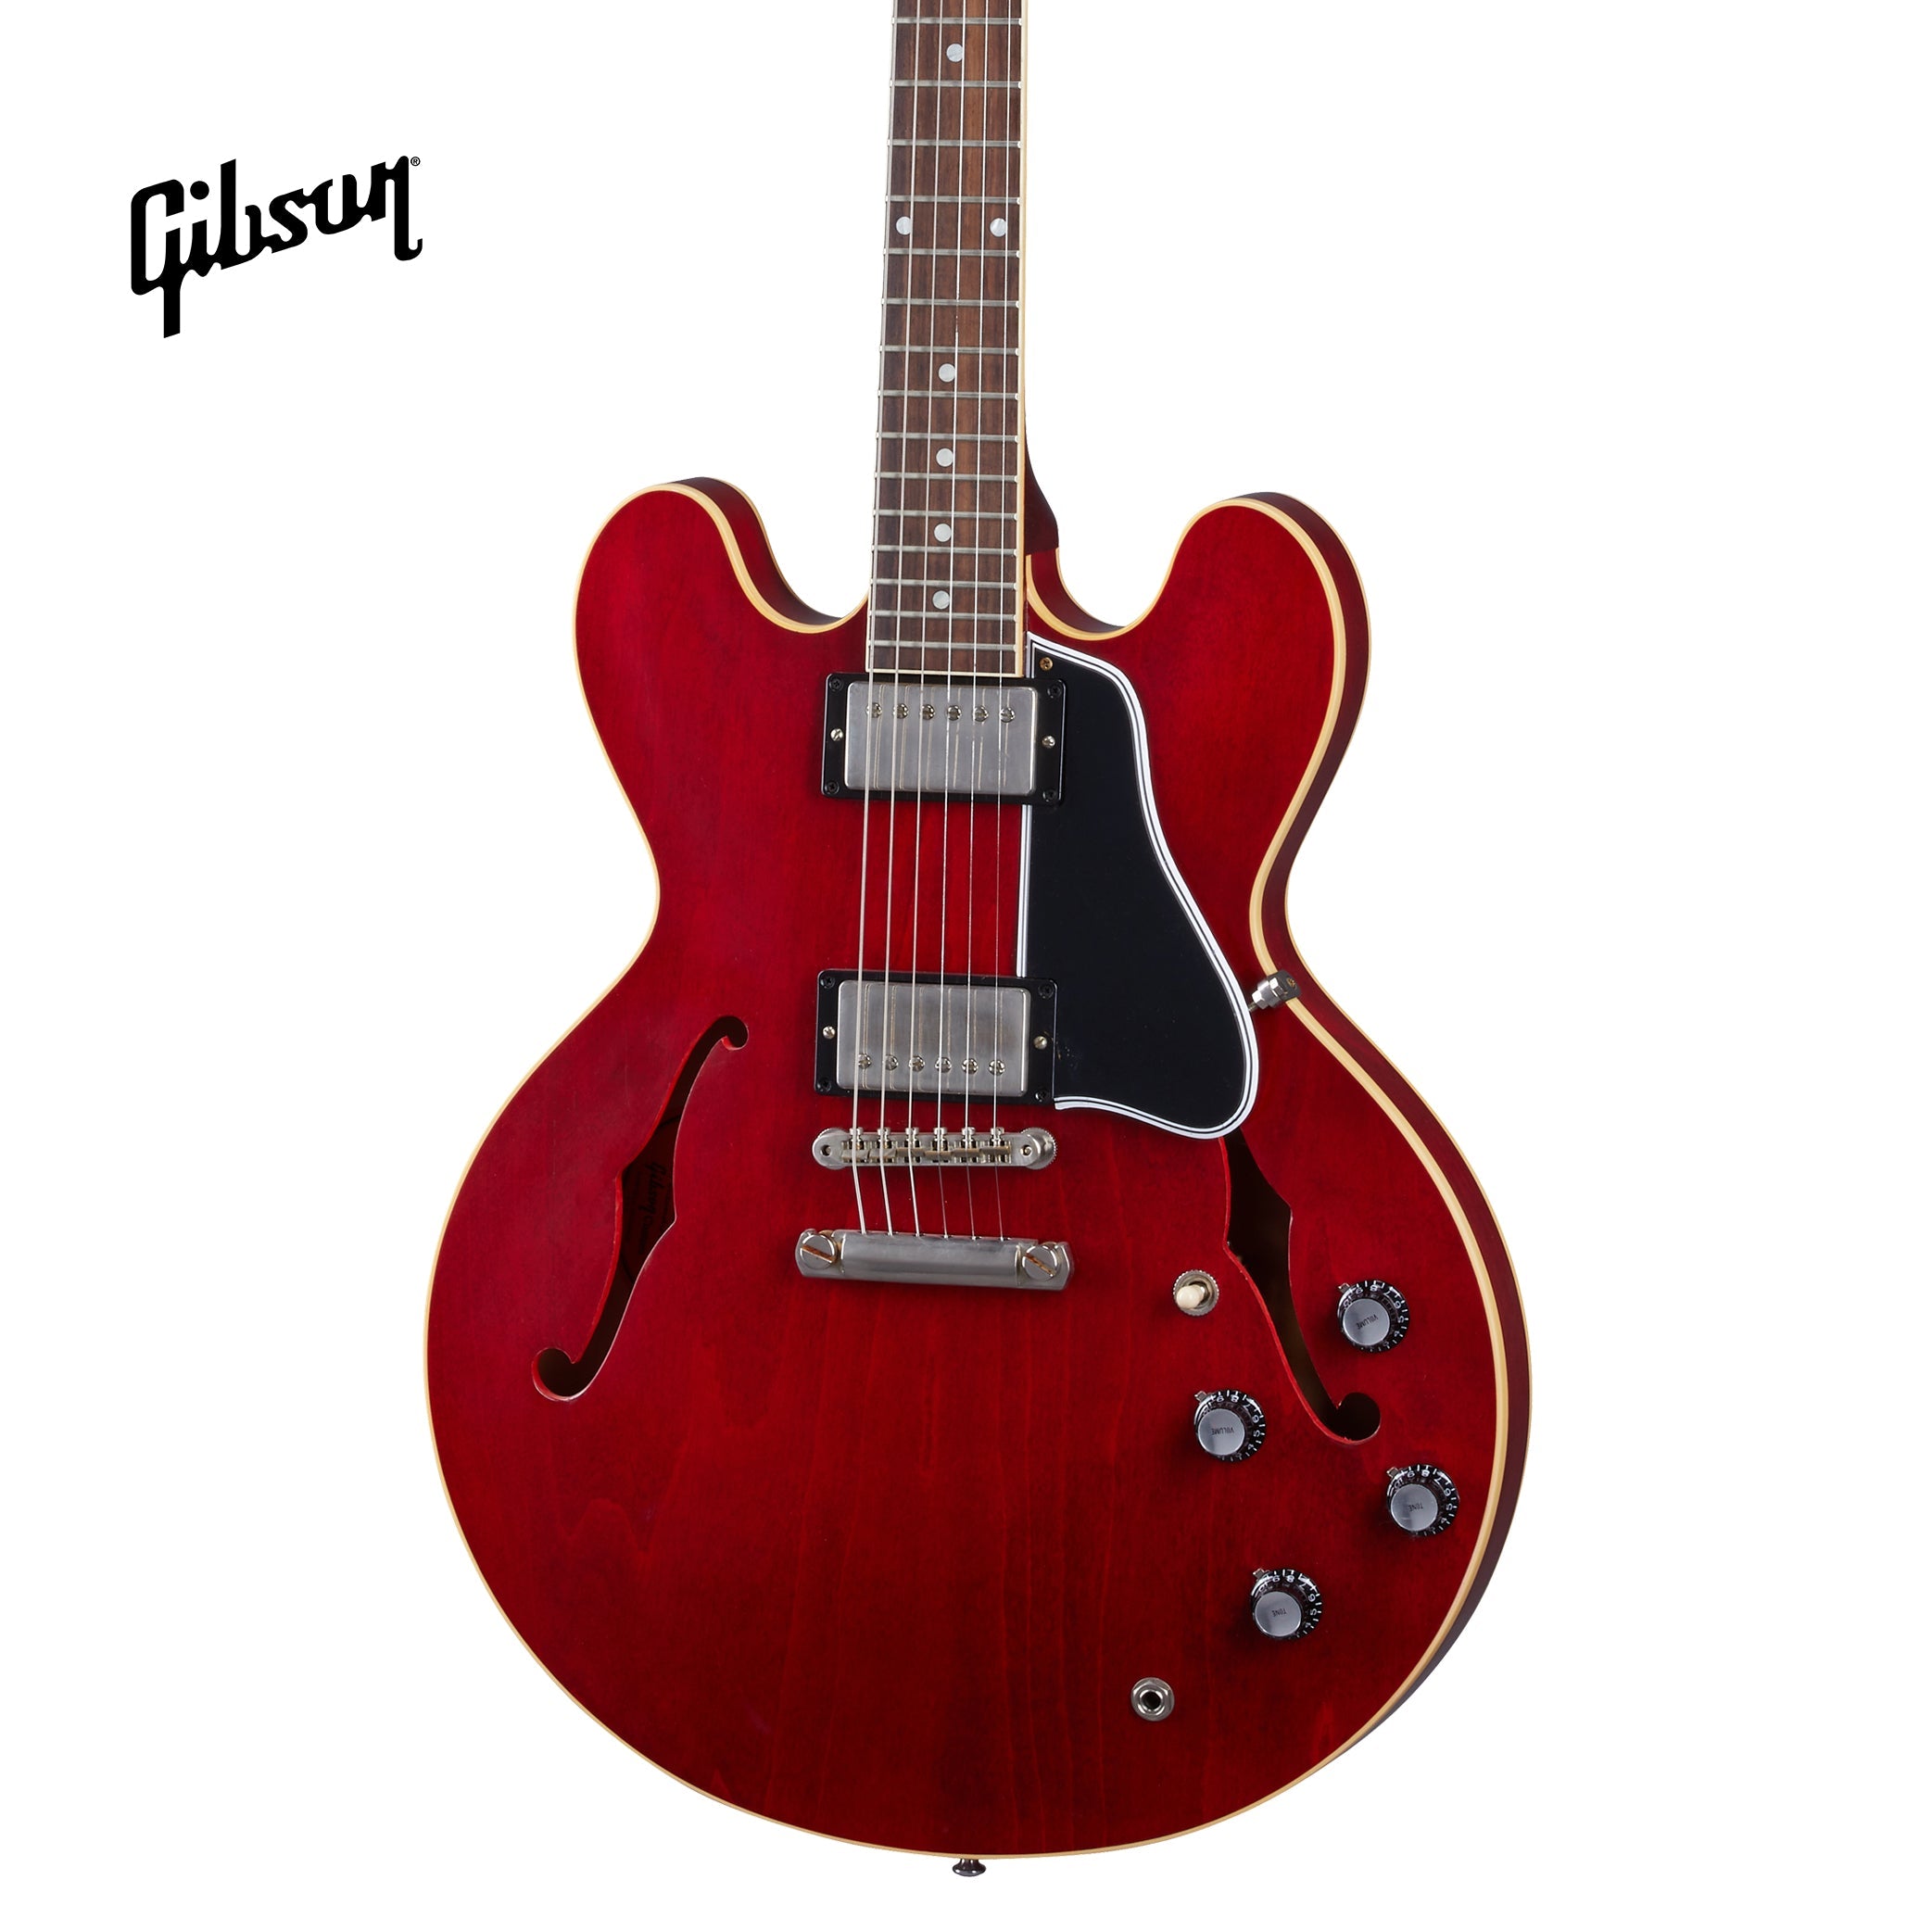 GIBSON 1961 ES-335 REISSUE ULTRA LIGHT AGED SEMI-HOLLOWBODY ELECTRIC GUITAR - 60S CHERRY